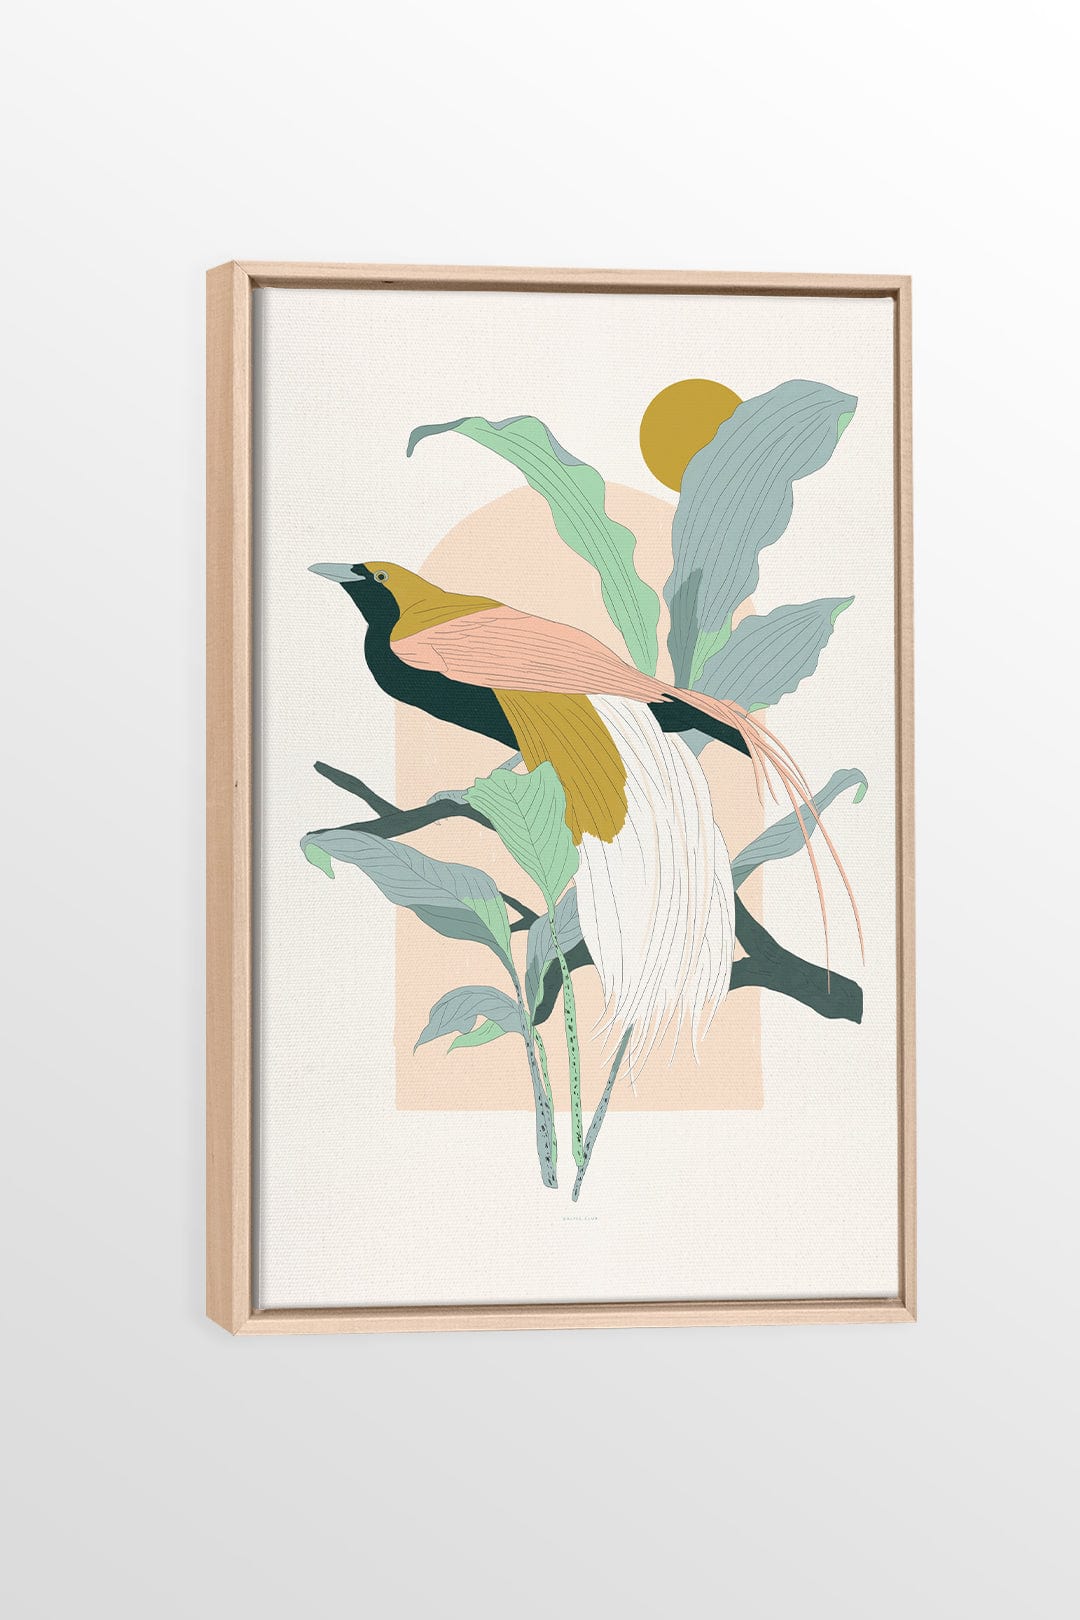 Arcade (Greater Bird of Paradise) - Printed illustration on canvas